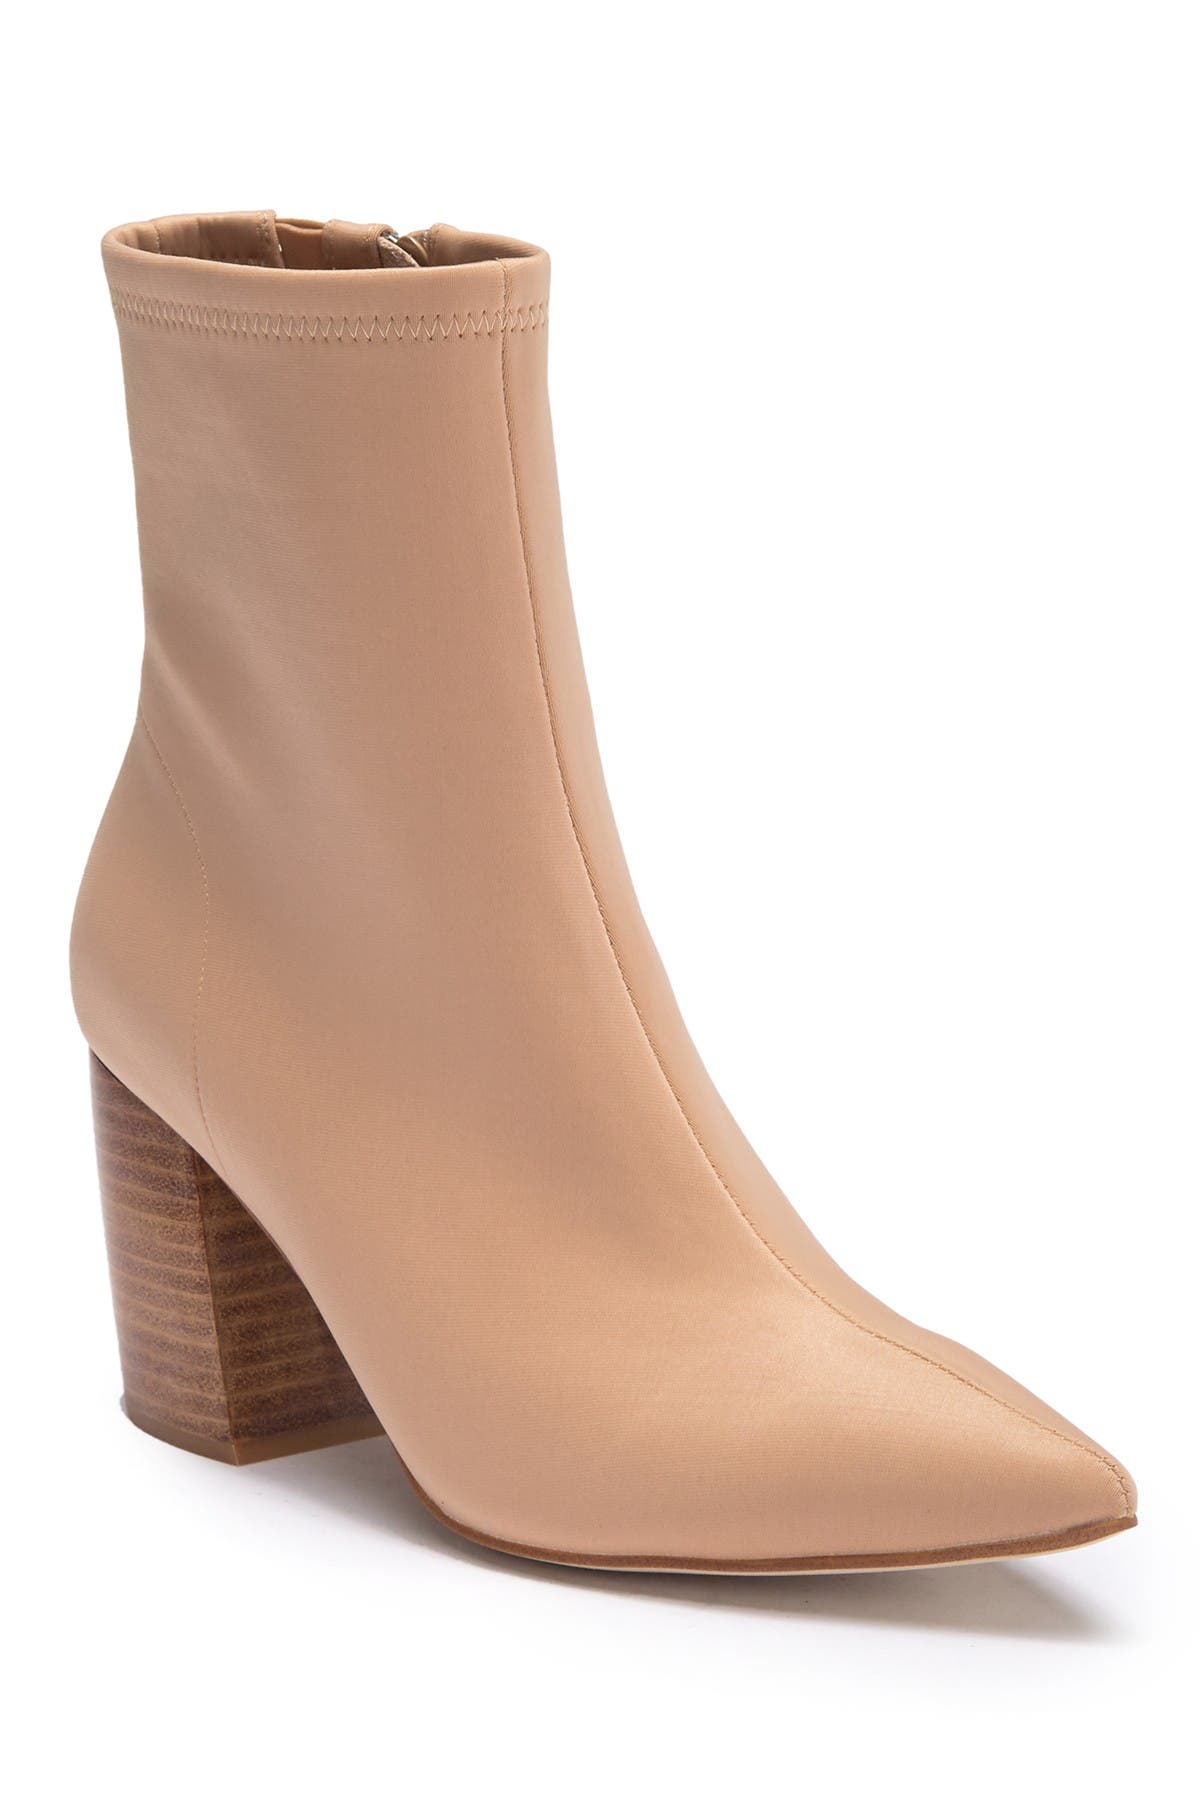 nordstrom jeffrey campbell boots